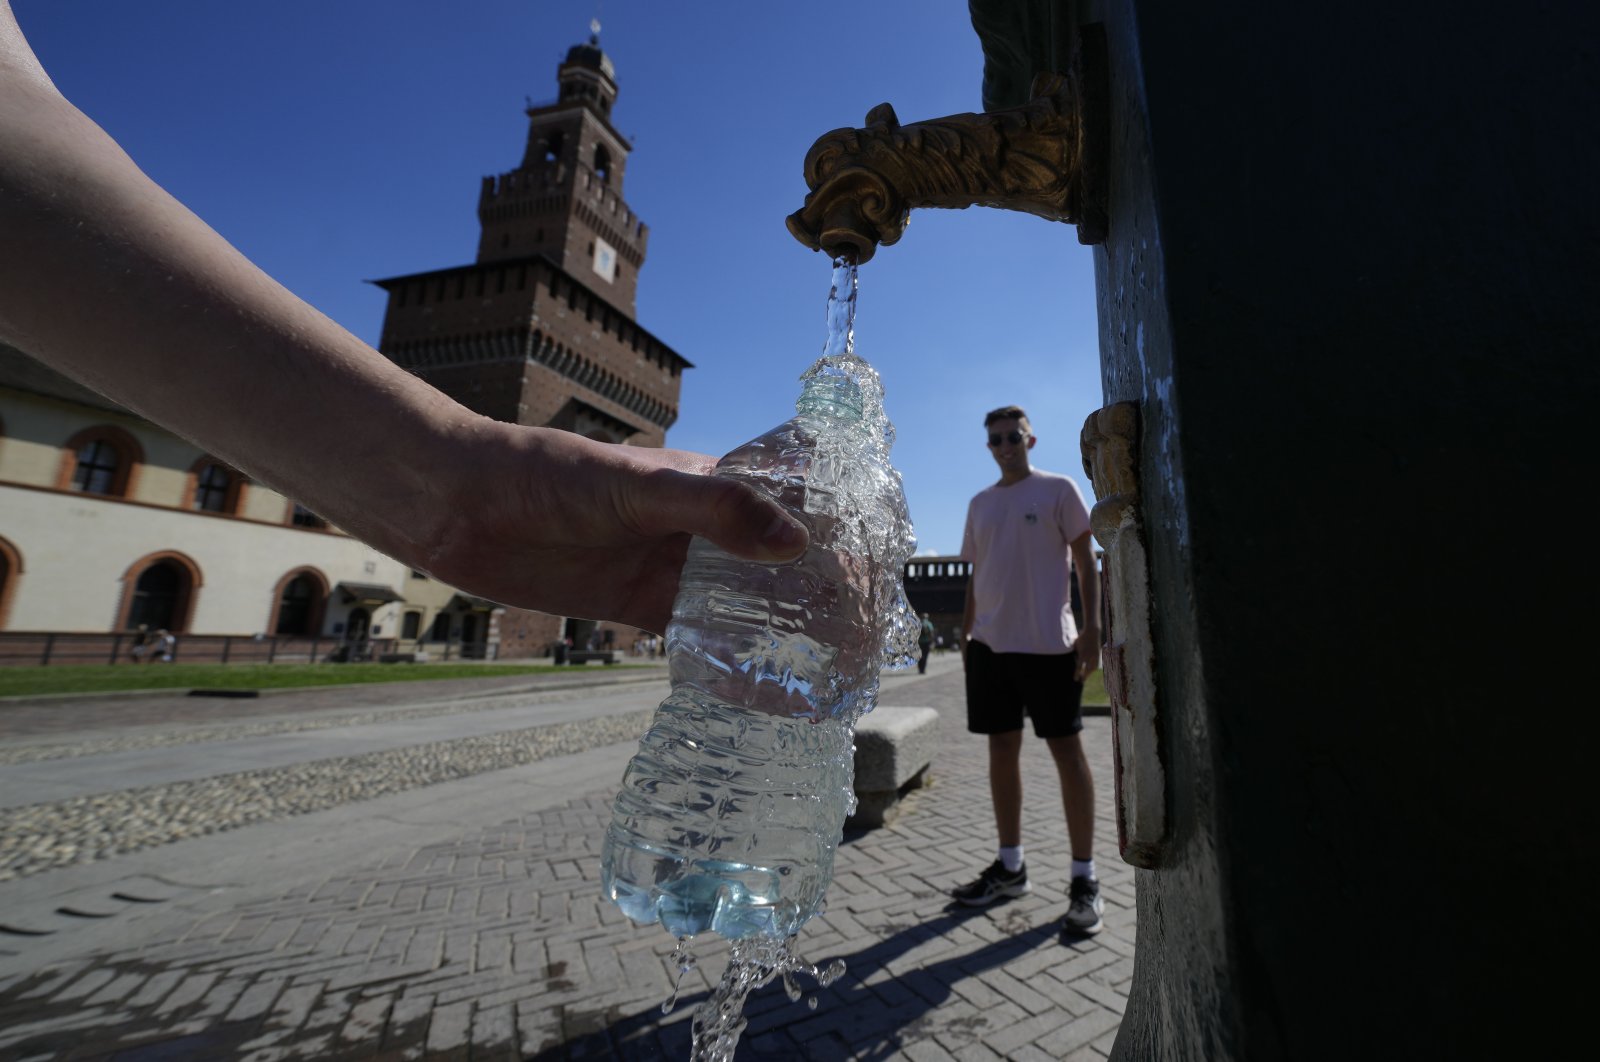 Tourists fill plastic bottles with water from a public fountain at Sforzesco Castle, in Milan, Italy, June 25, 2022. (AP Photo)